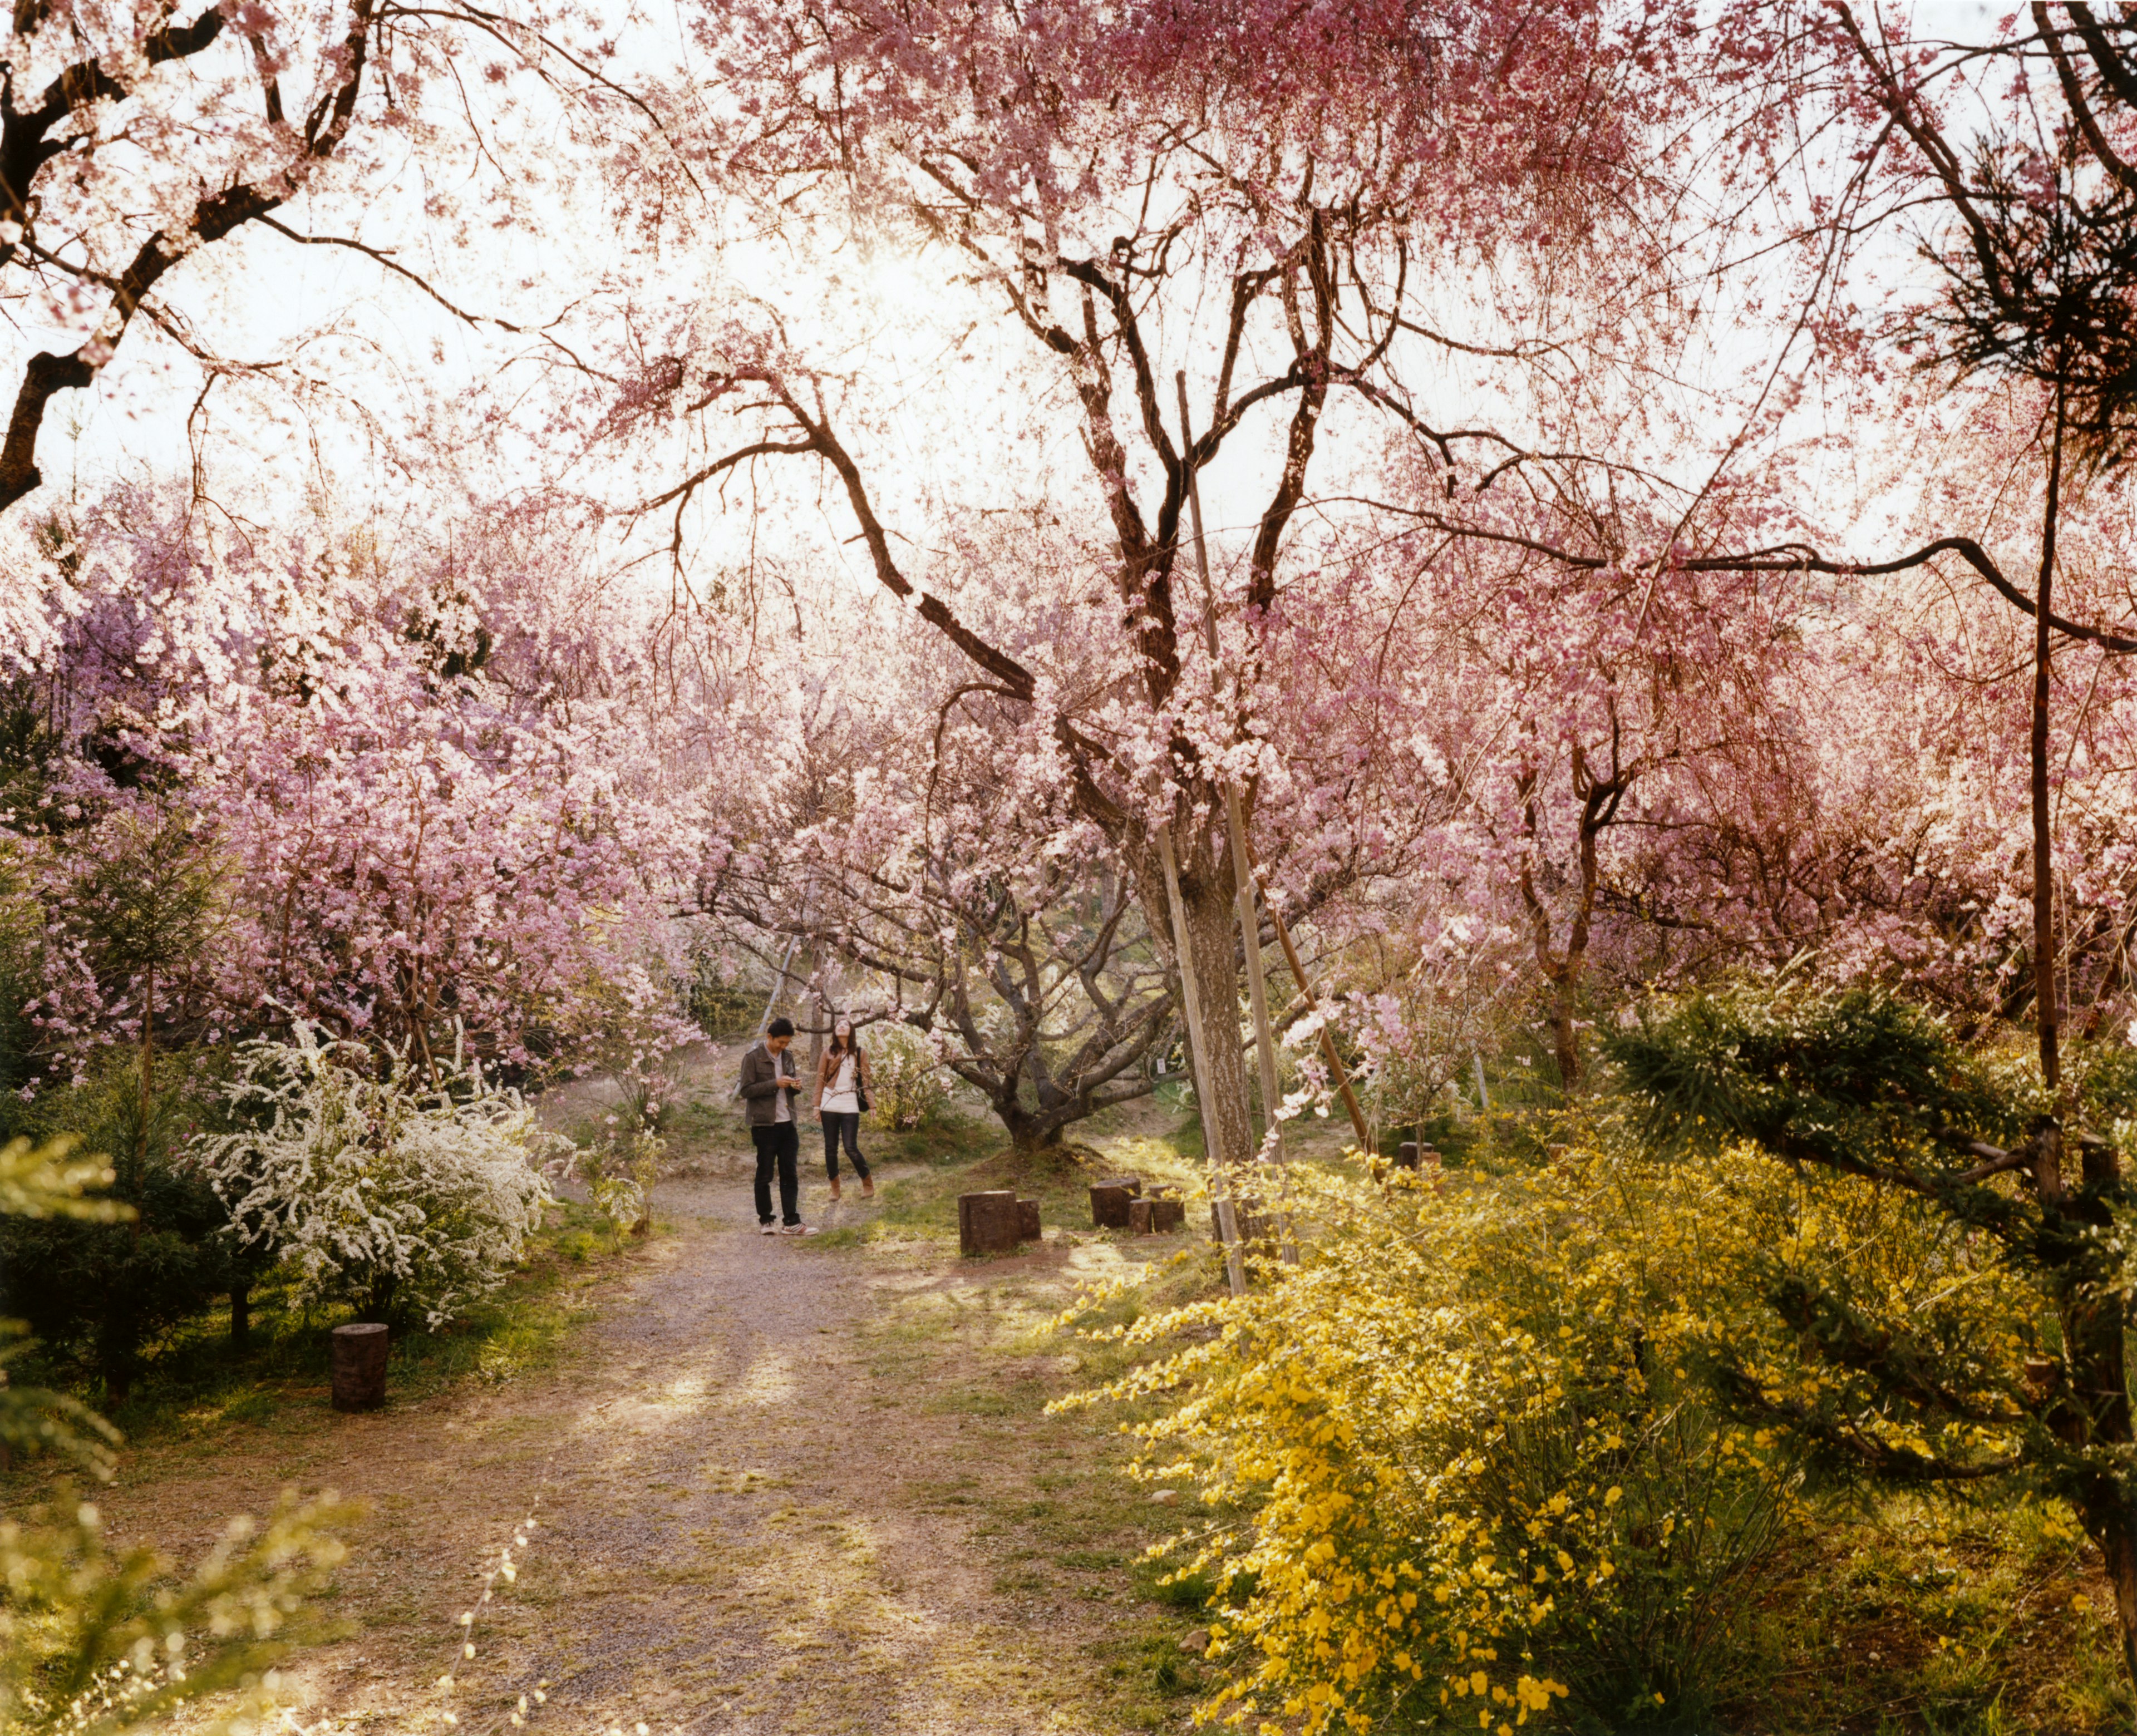 Couple admiring cherry blossom trees in Kyoto Park.